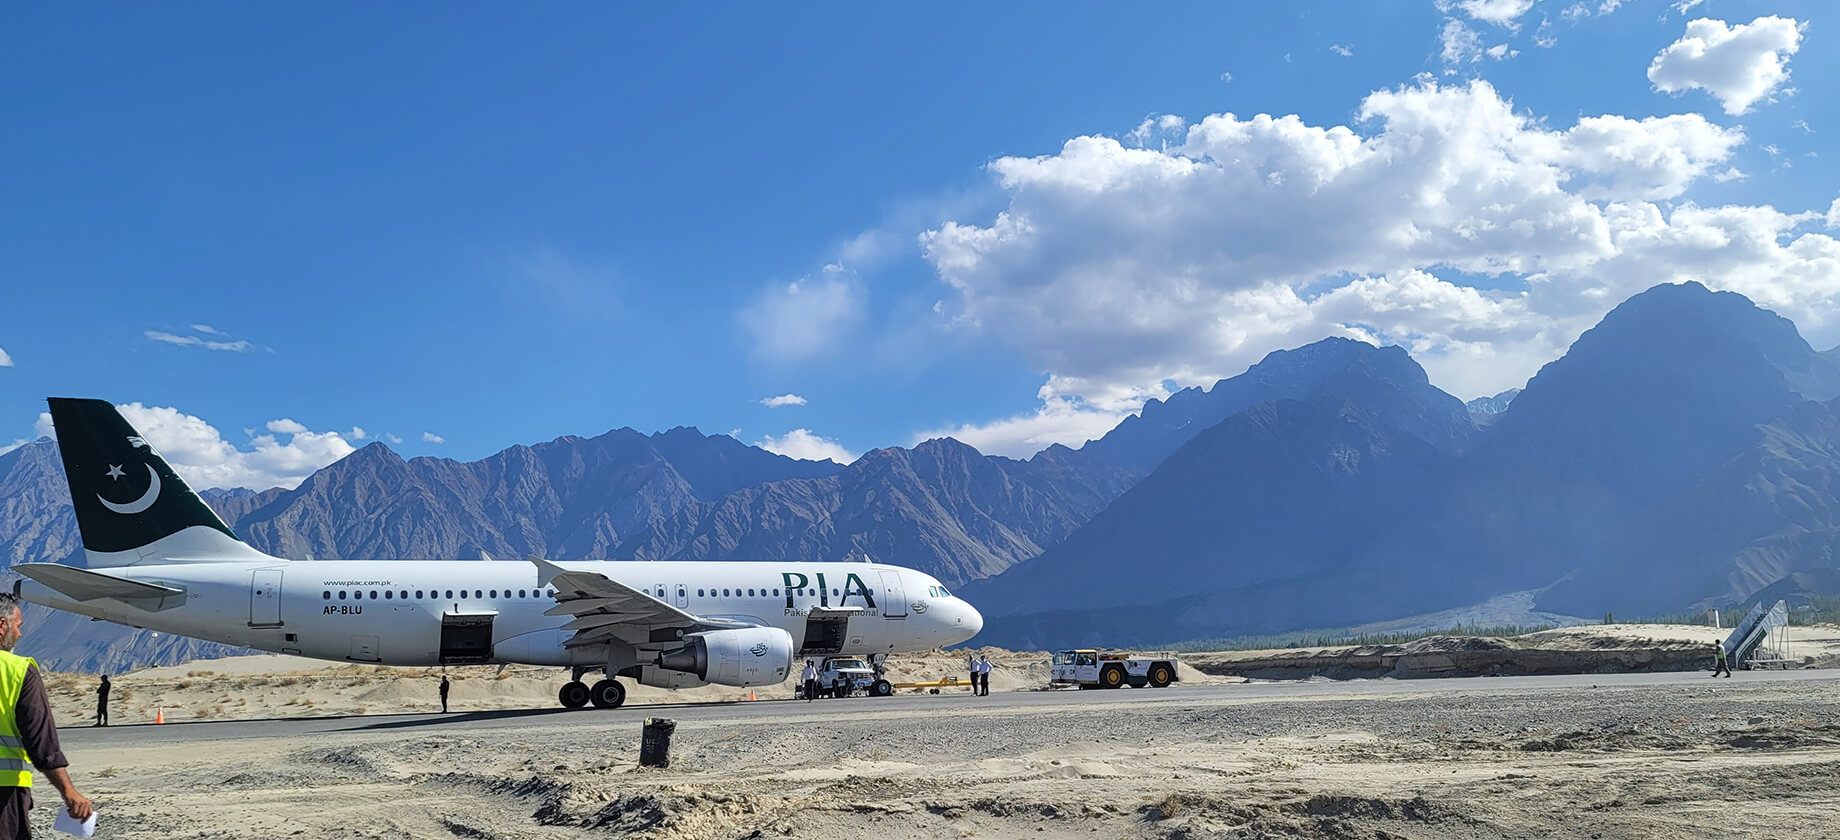 About Skardu Airport